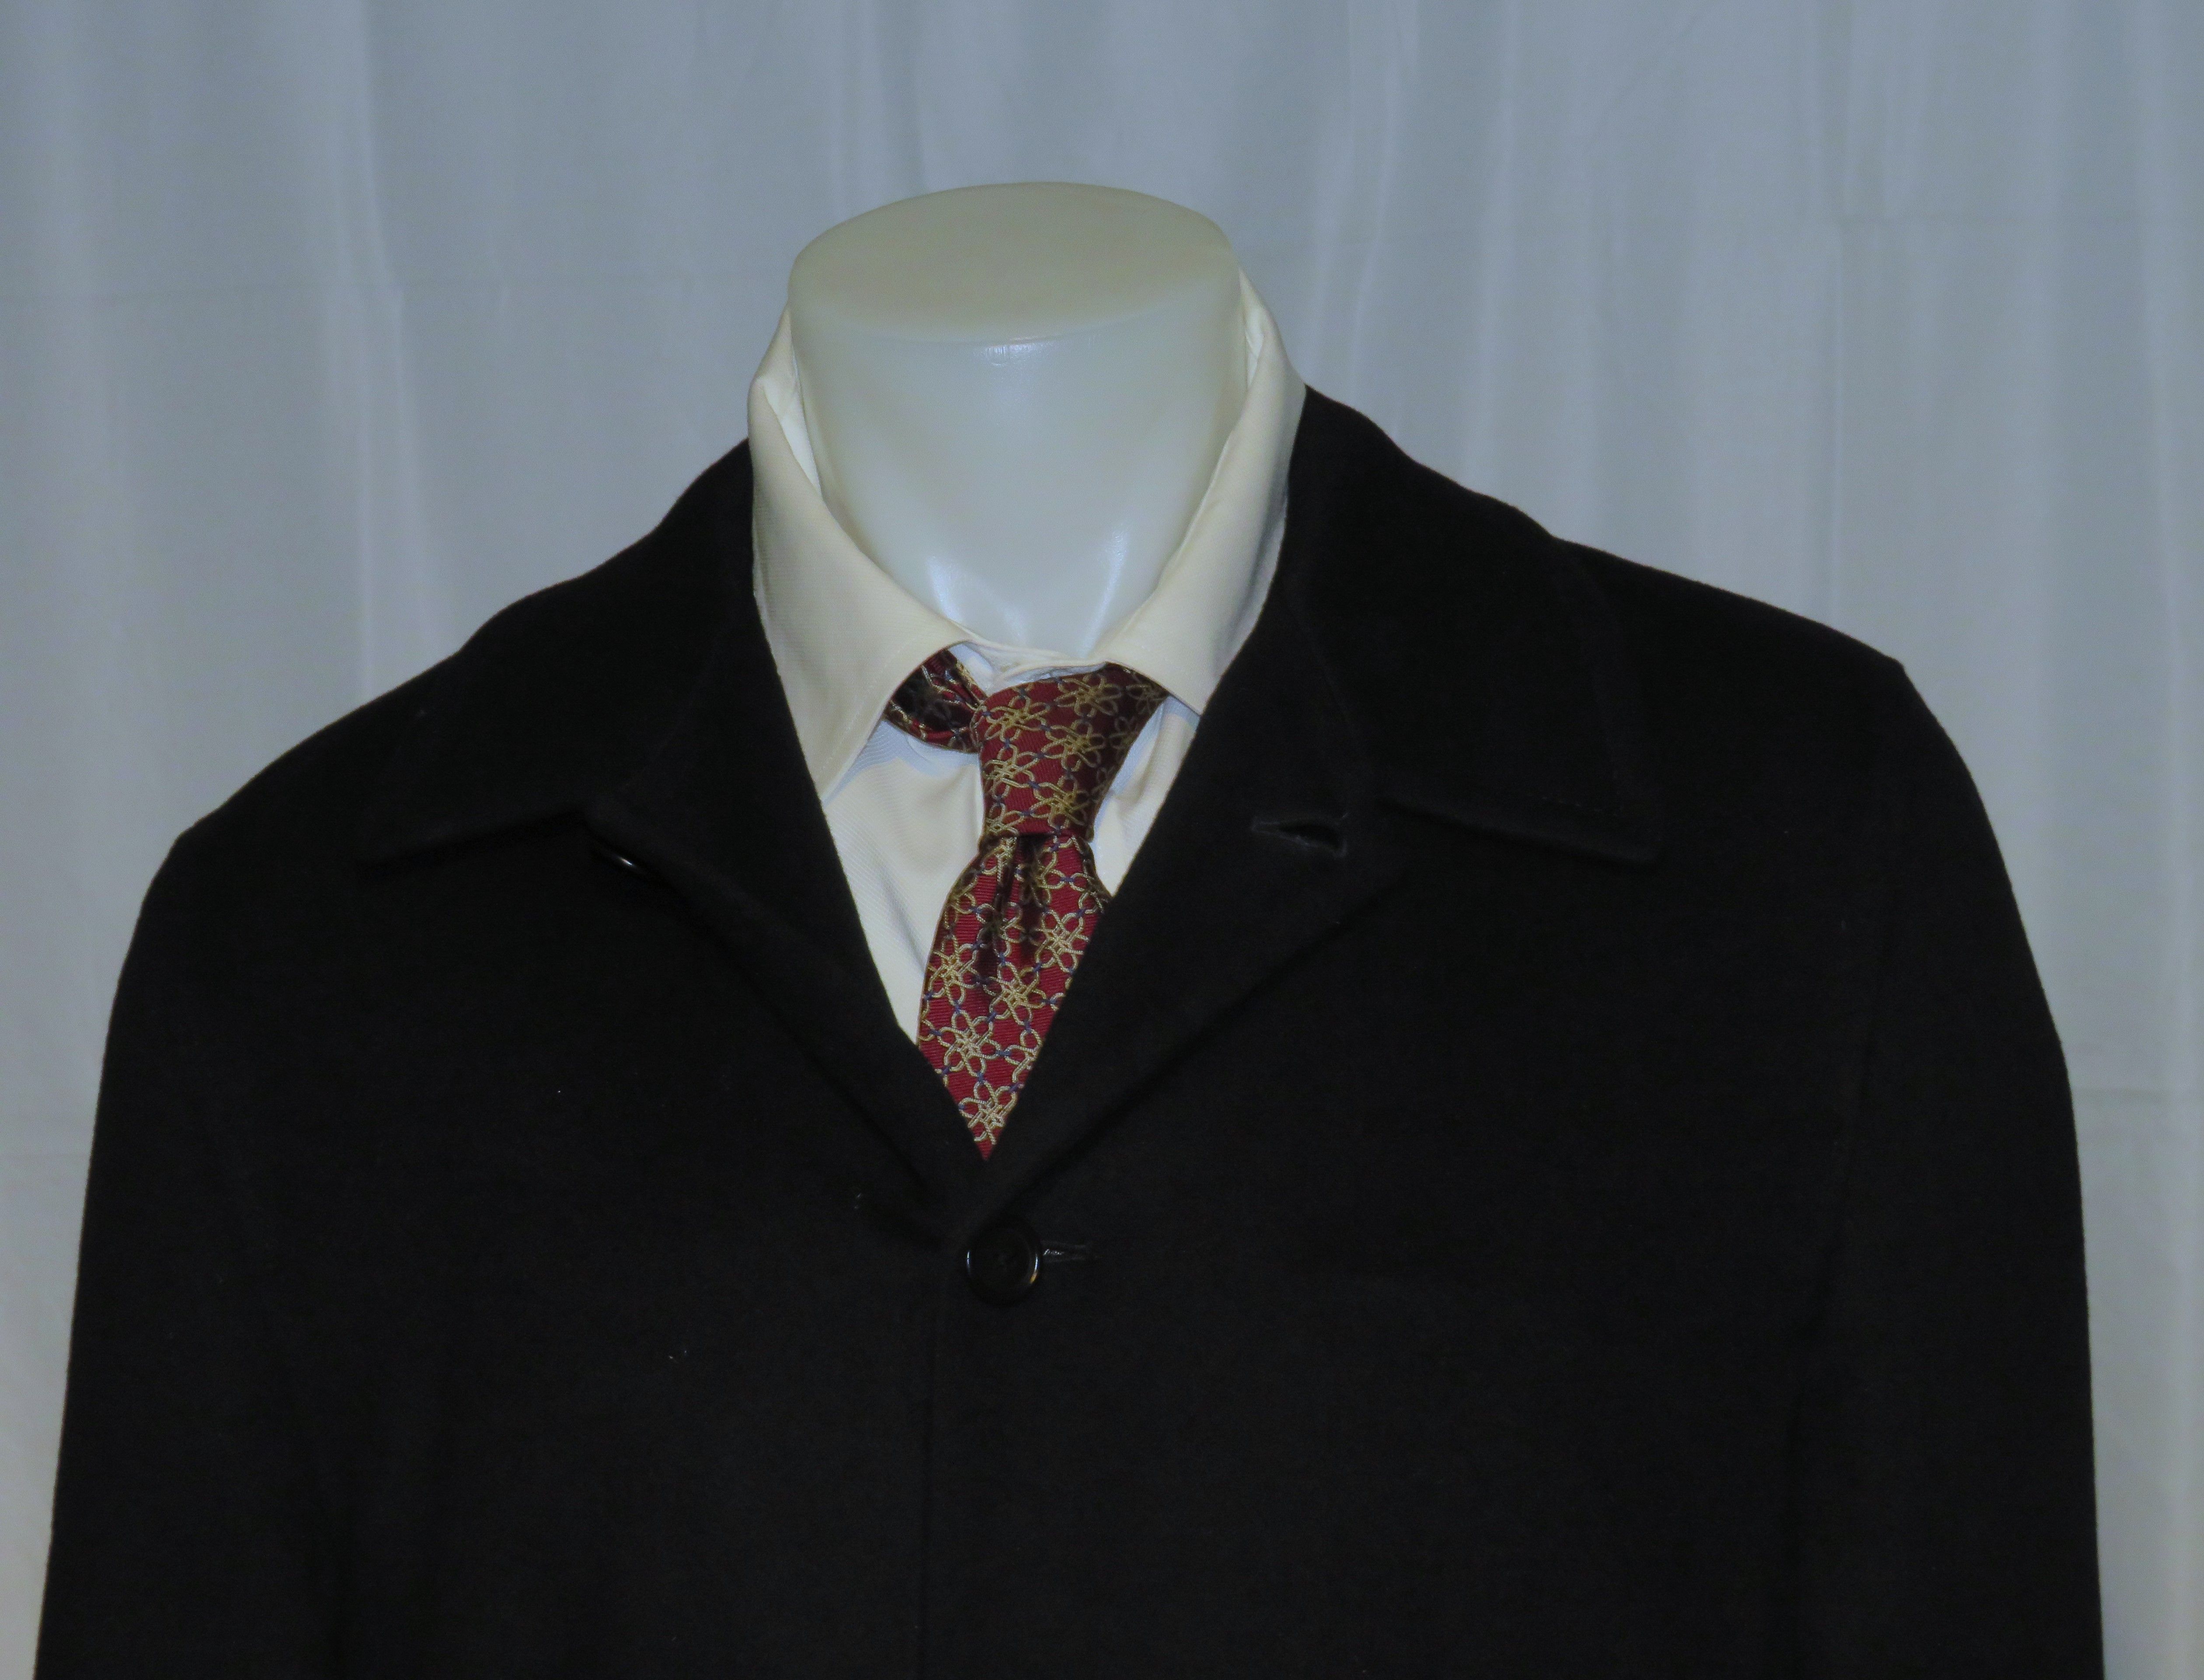 Other Great Scott Angora Blend Black Brushed Flannel Top Coat 46 Size US XL / EU 56 / 4 - 2 Preview